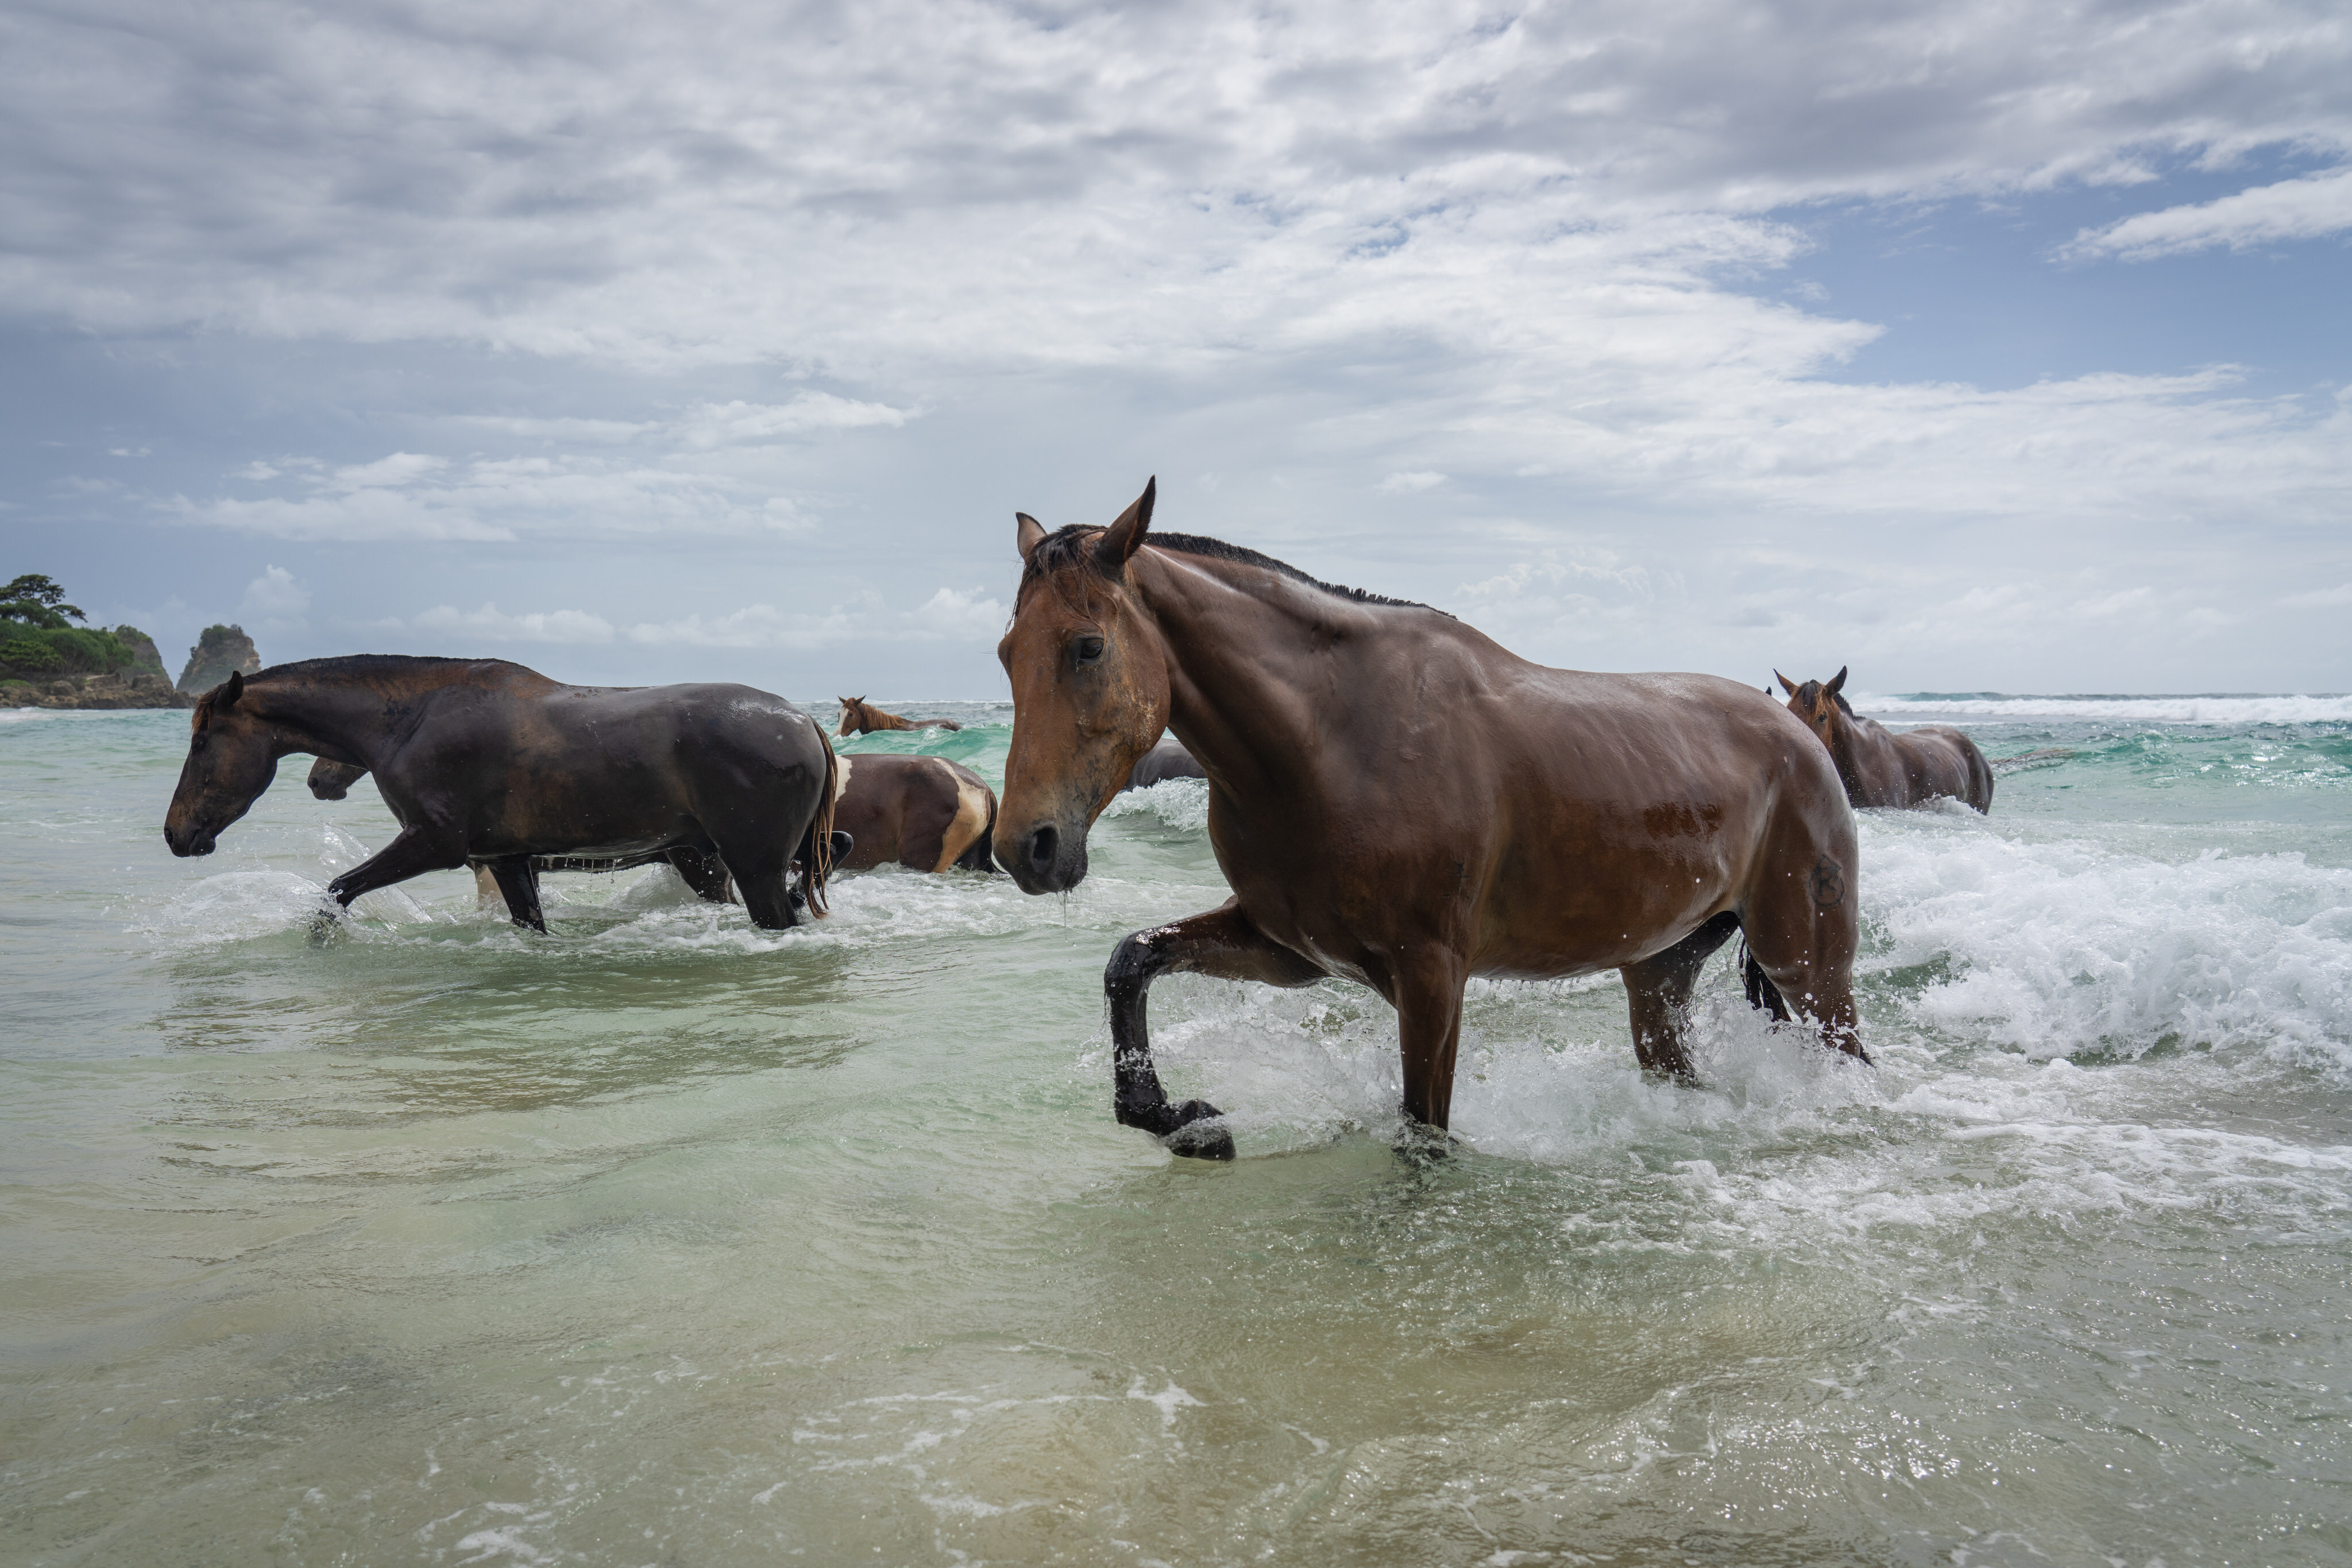 Sumba horses gallop from the Indian Ocean back towards the beach at Nihi Sumba. The Indonesian resort drew local Instagram influencers who swam with the horses, opening a new market. Now domestic travel is banned to curb the spread of coronavirus. Photo: Getty Images